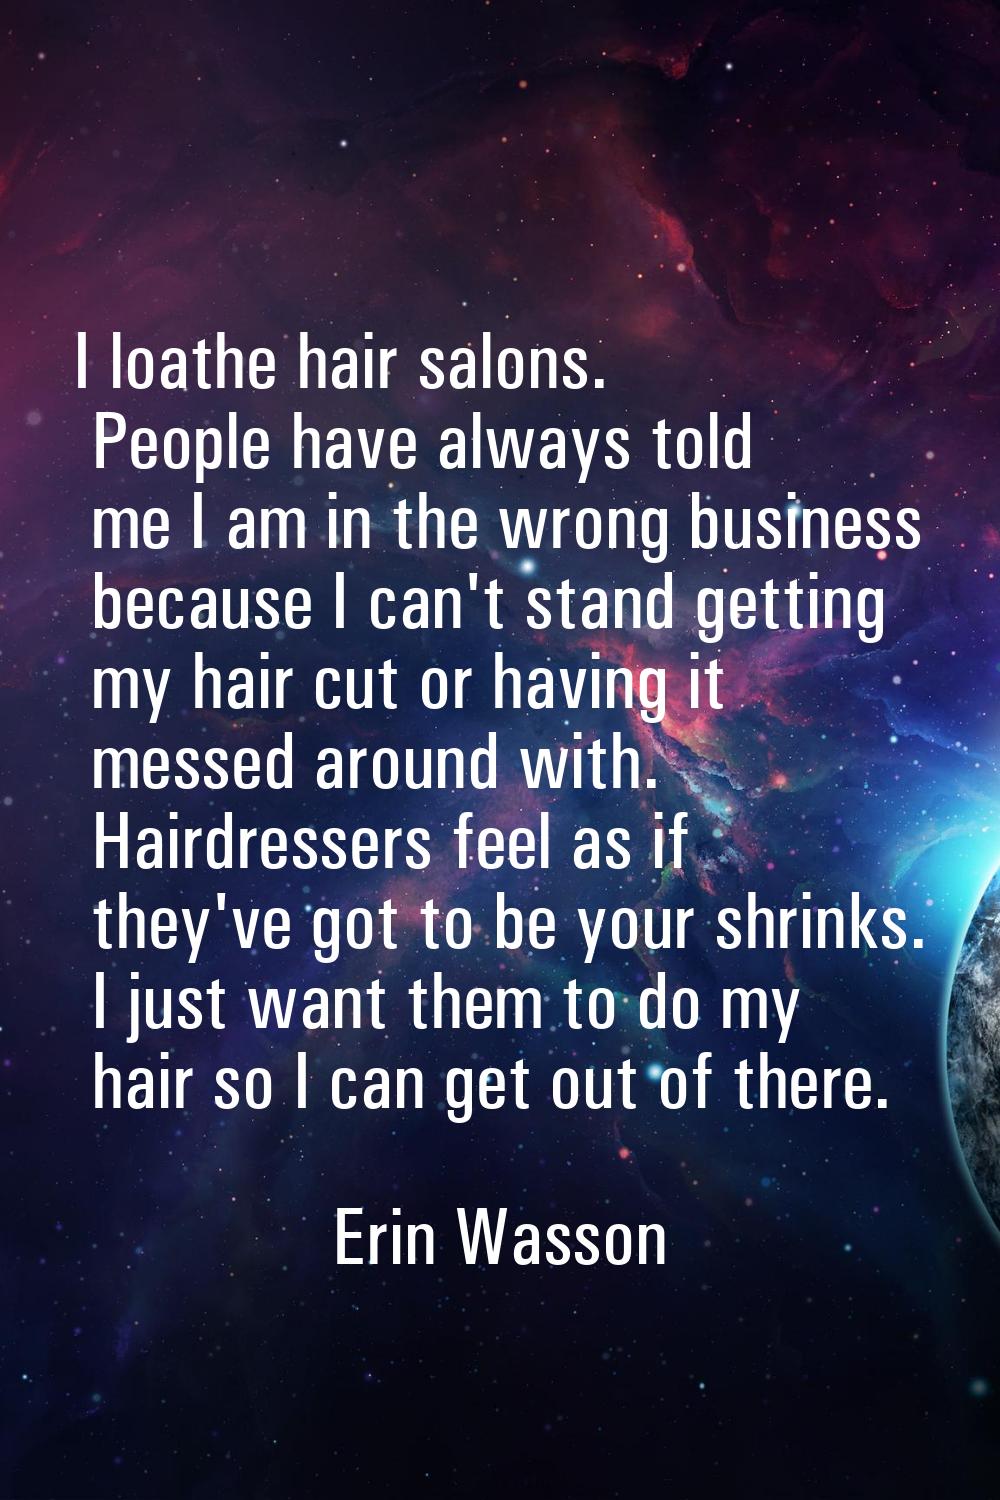 I loathe hair salons. People have always told me I am in the wrong business because I can't stand g